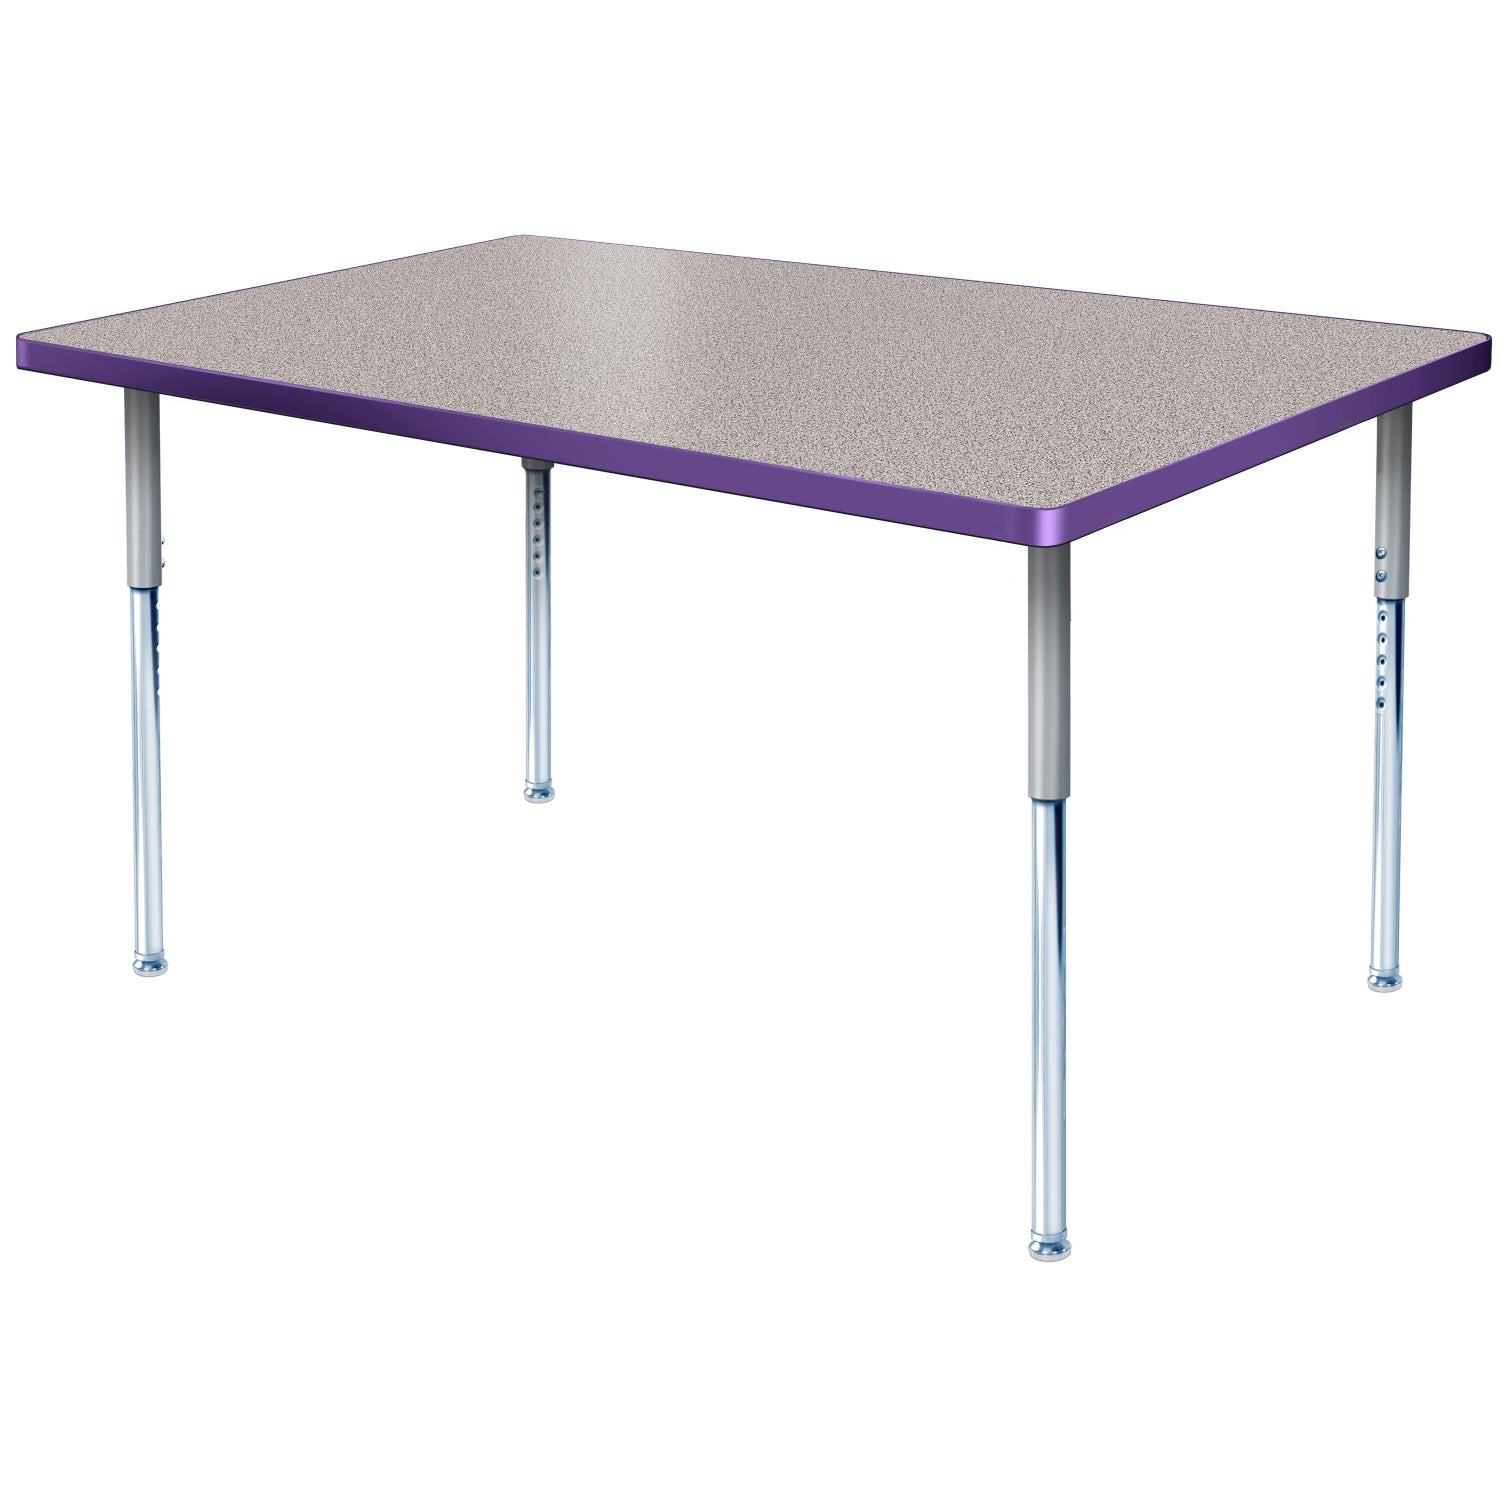 Modern Classic Series 36 x 72" Rectangular Activity Table with High Pressure Laminate Top, Adjustable Height Legs